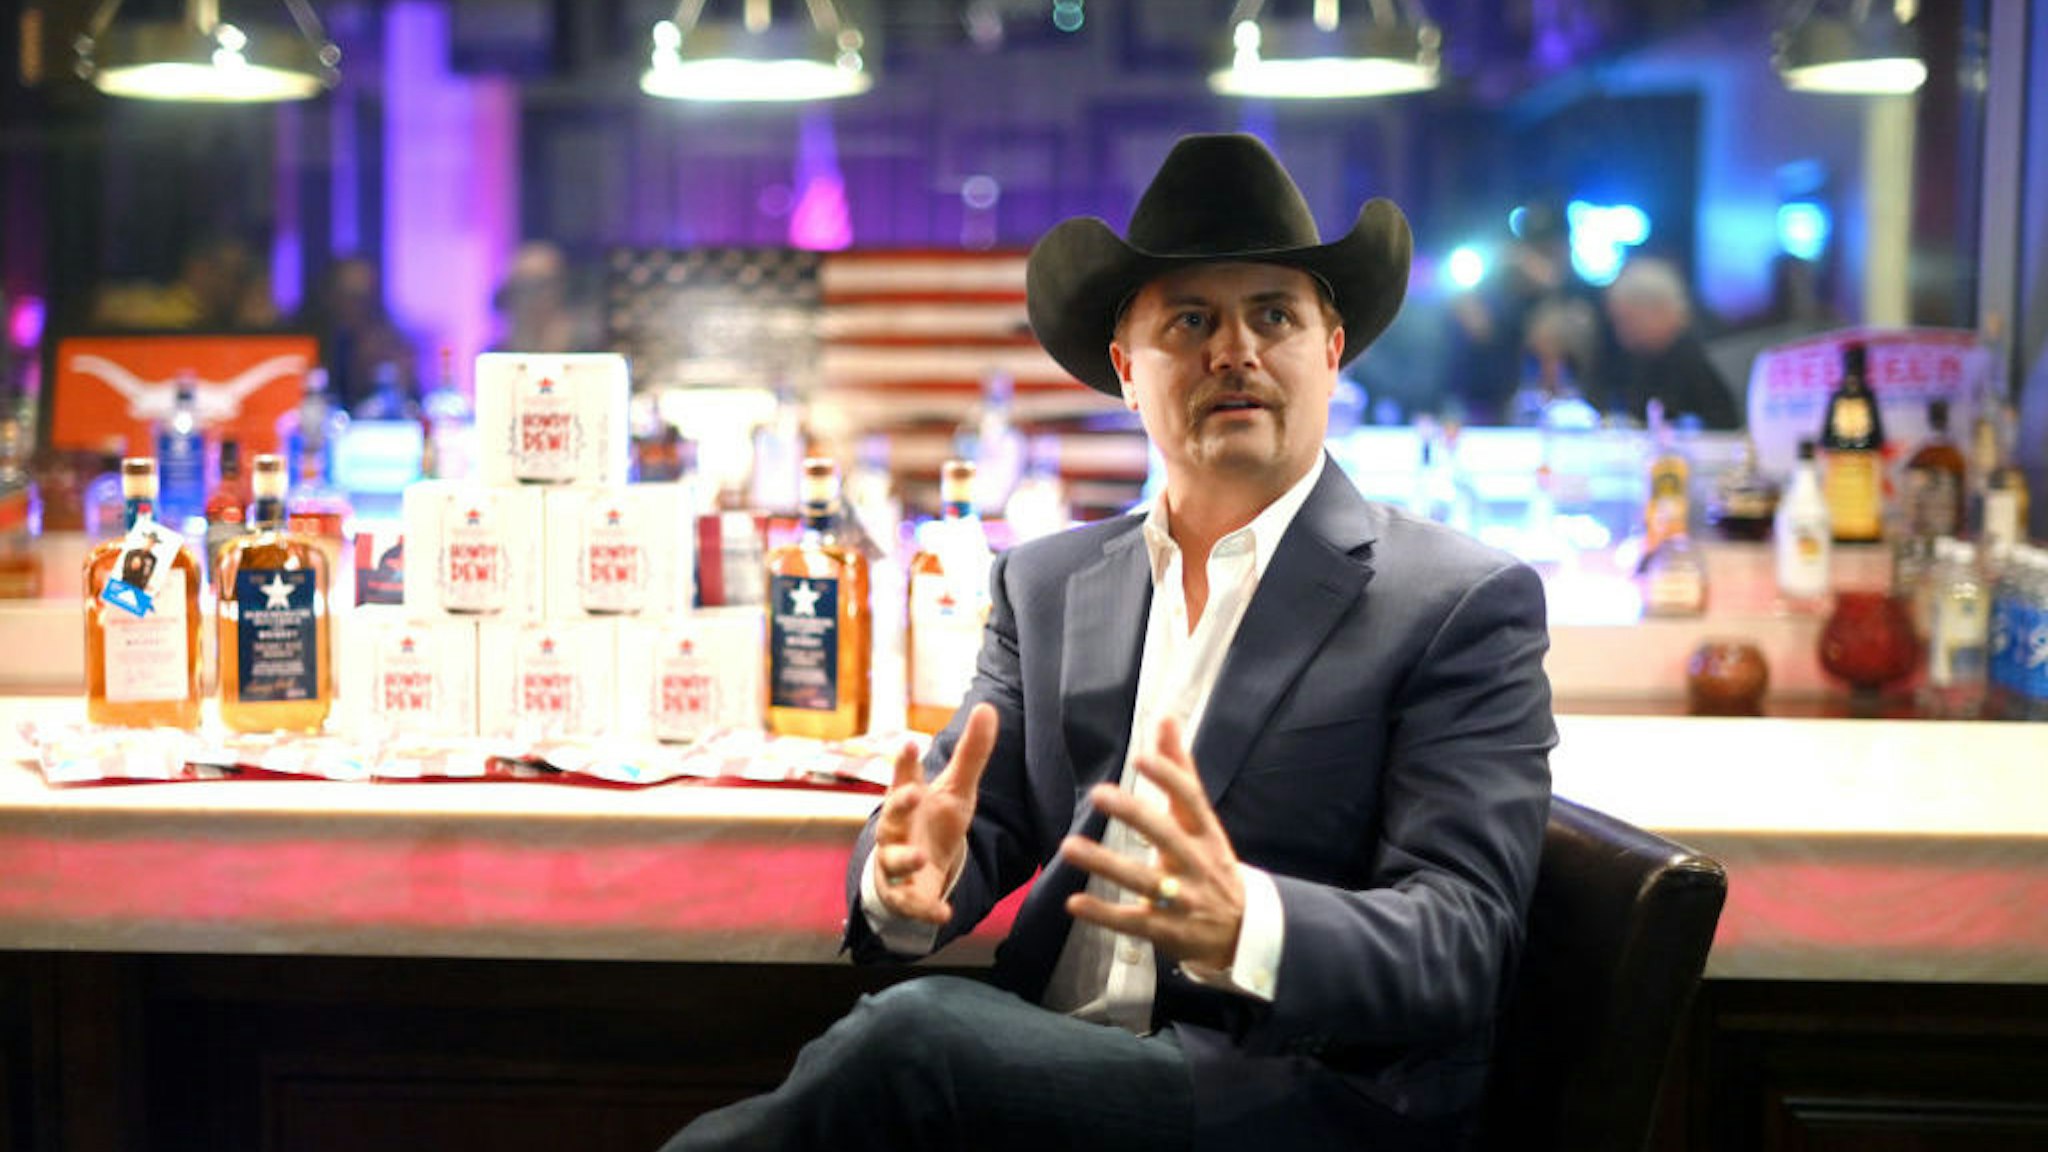 NASHVILLE, TENNESSEE - JANUARY 11: John Rich of Big & Rich attends the Redneck Riviera Whiskey 2nd Anniversary celebration at Mount Richmore on January 11, 2020 in Nashville, Tennessee. (Photo by Jason Kempin/Getty Images)